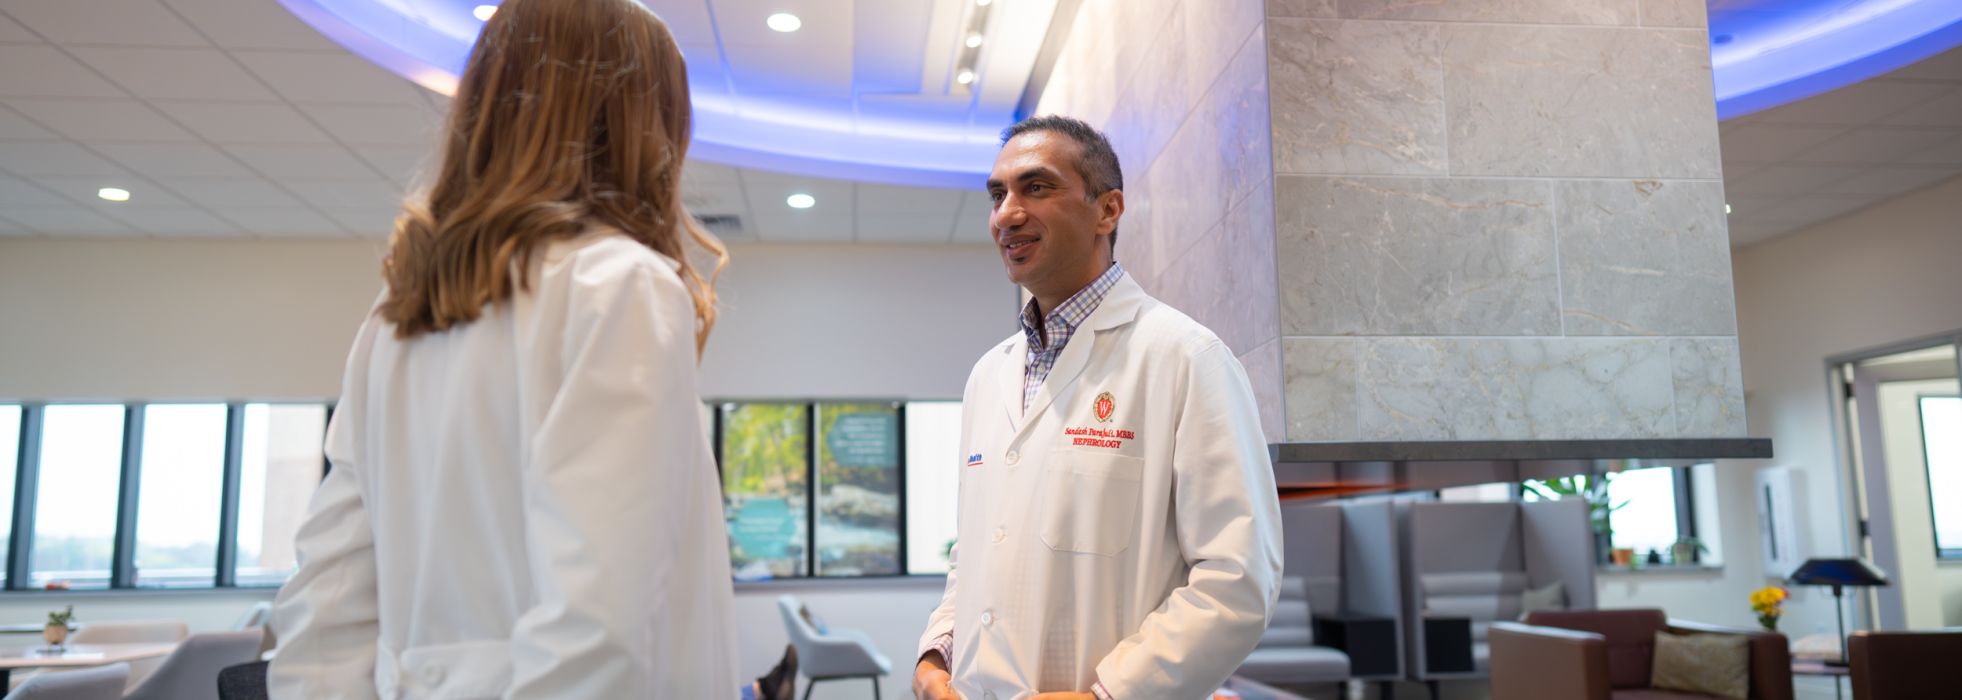 Dr. Sandesh Parajuli and Lindsey Murphy, NP, chat in the UW Hospital Collaboration Zone